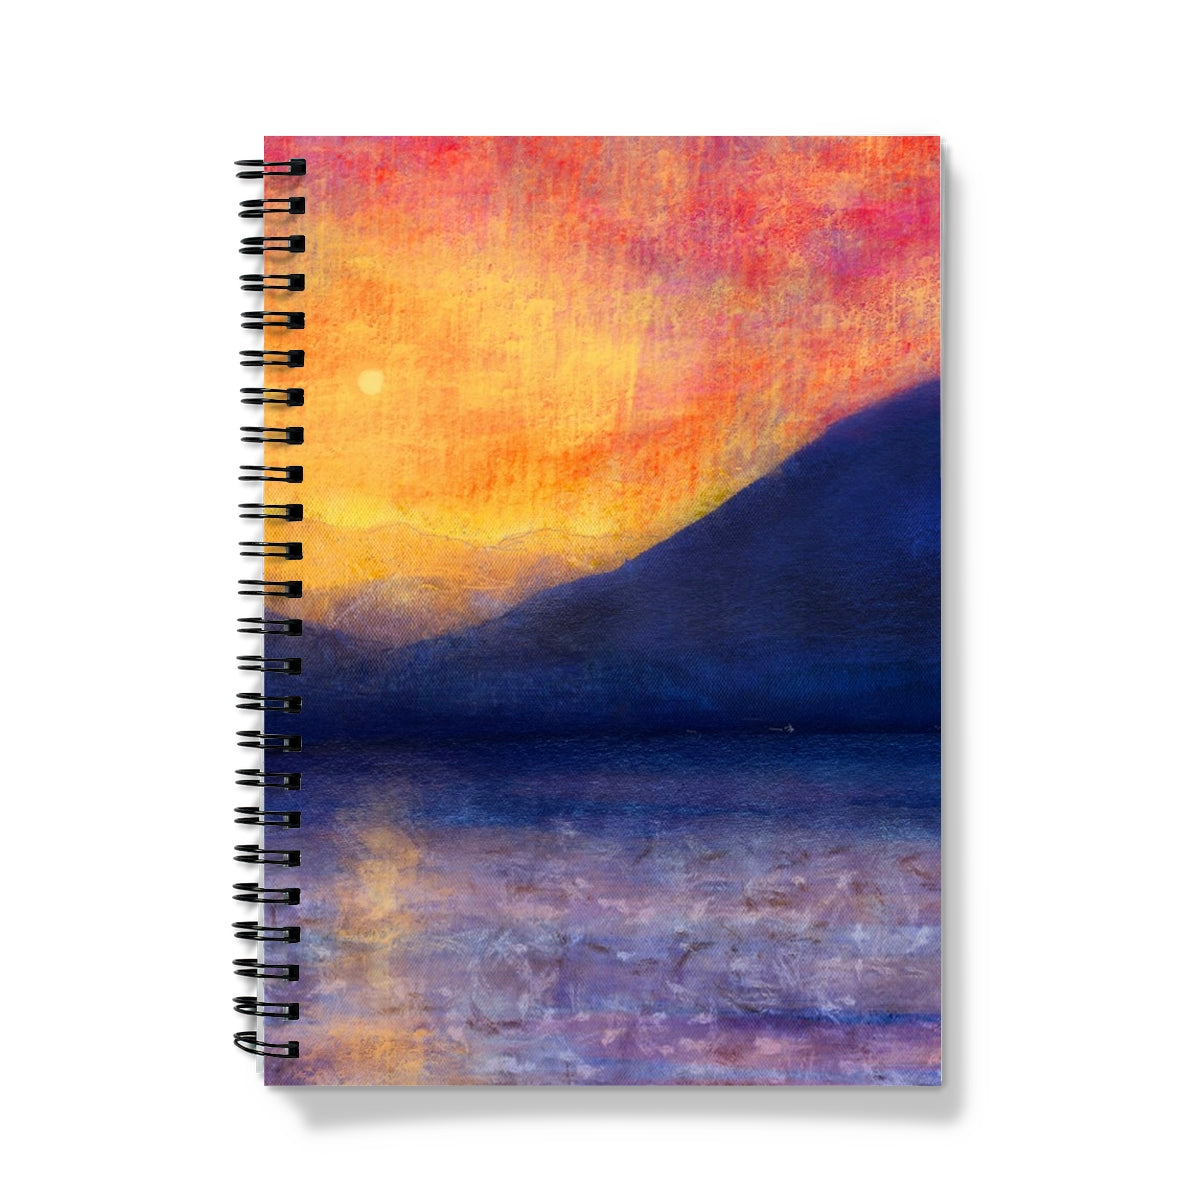 Sunset Approaching Mull Art Gifts Notebook-Journals & Notebooks-Hebridean Islands Art Gallery-A4-Graph-Paintings, Prints, Homeware, Art Gifts From Scotland By Scottish Artist Kevin Hunter